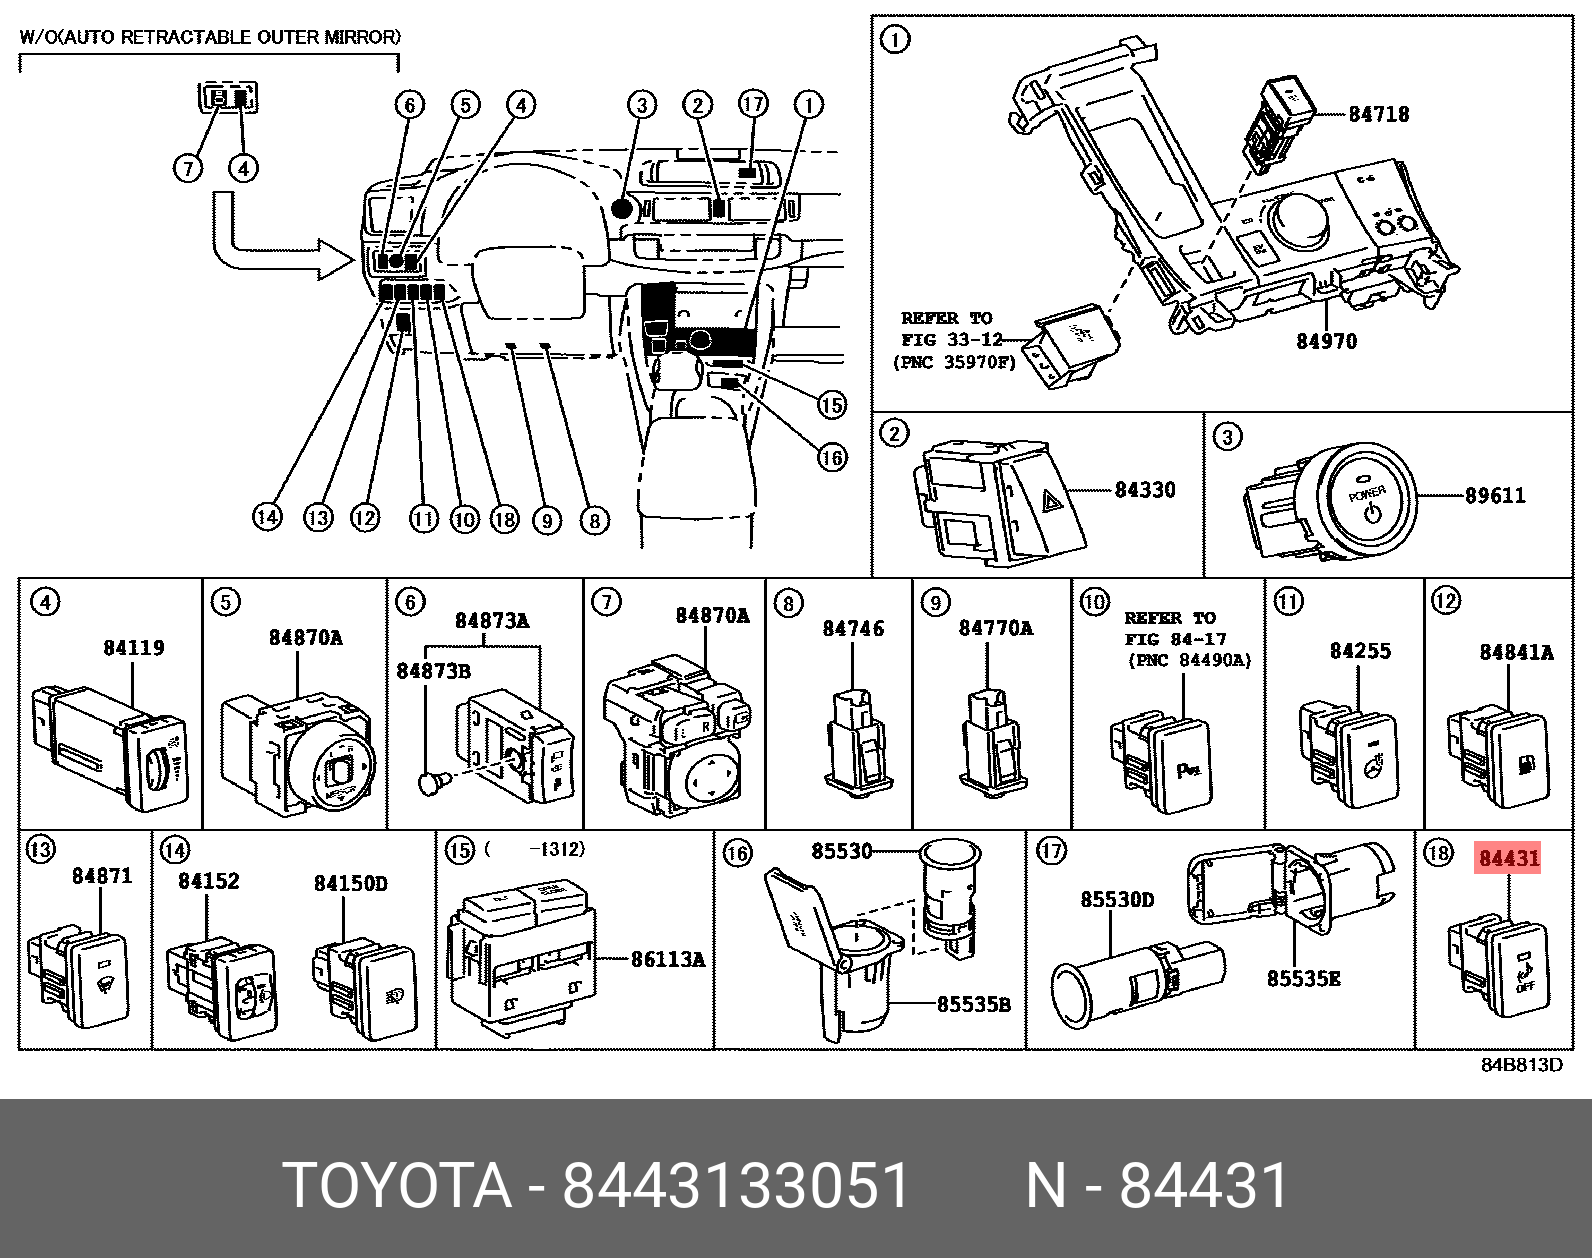 CAMRY HYBRID 201108 - 201704, SWITCH, VEHICLE APPROACHING SPEAKER